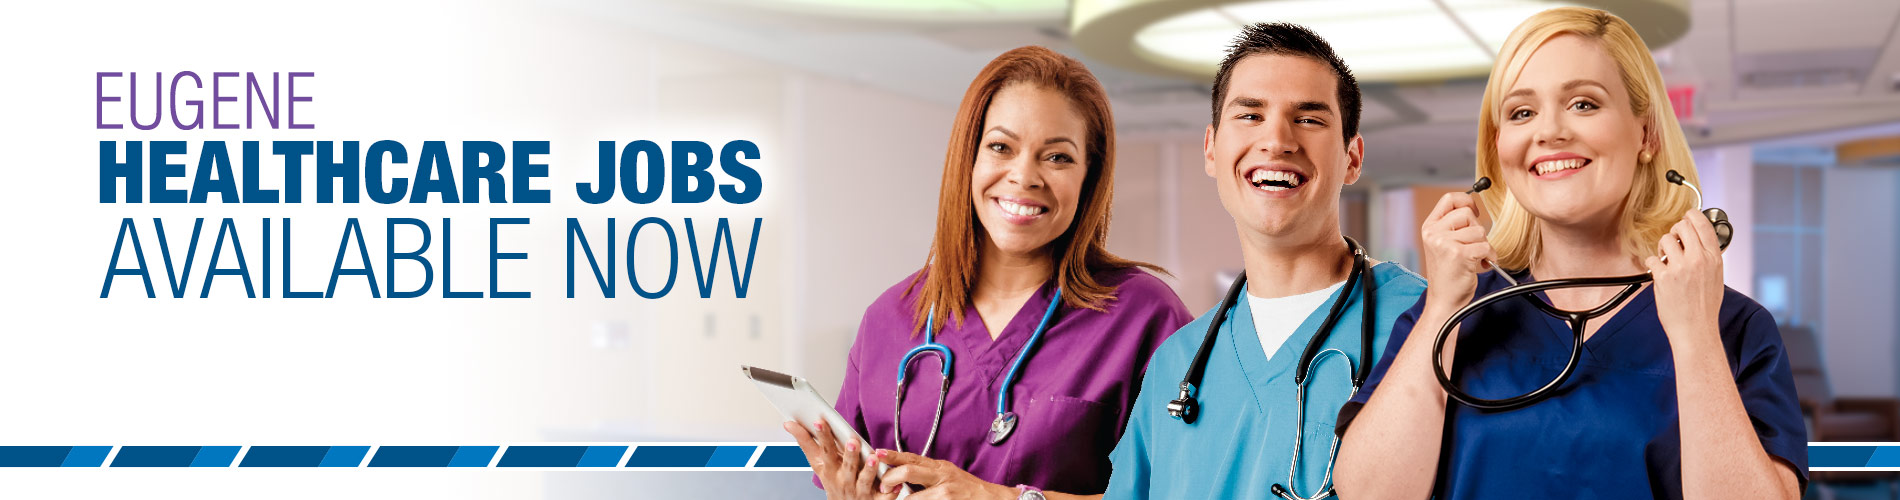 Home Page Eugene Heathcare Jobs Banner